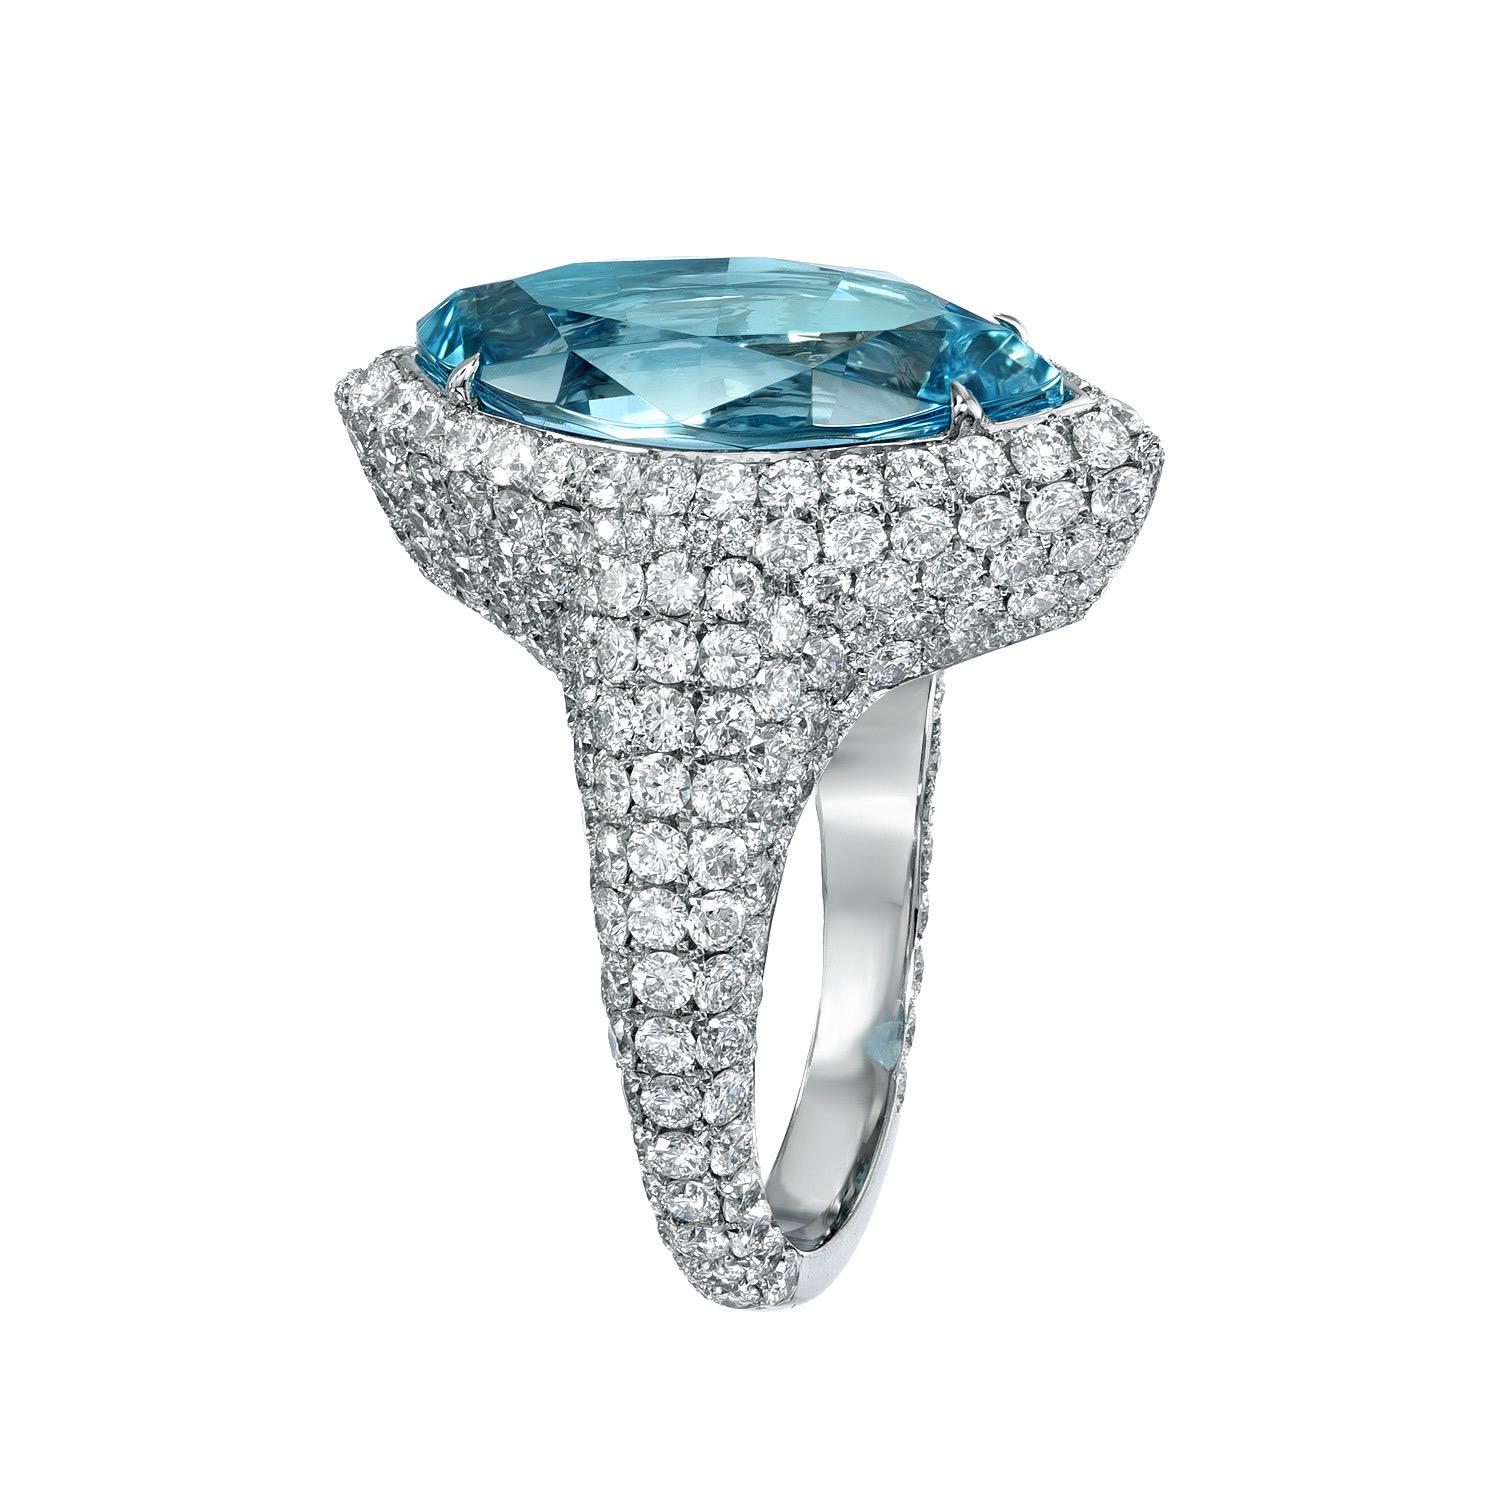 Exquisite 5.25 carat Aquamarine Marquise, platinum ring, decorated with round brilliant collection diamonds, weighing a total of 3.50 carats.
Ring size 6. Resizing is complementary upon request.
Crafted by extremely skilled hands in the USA.
Returns